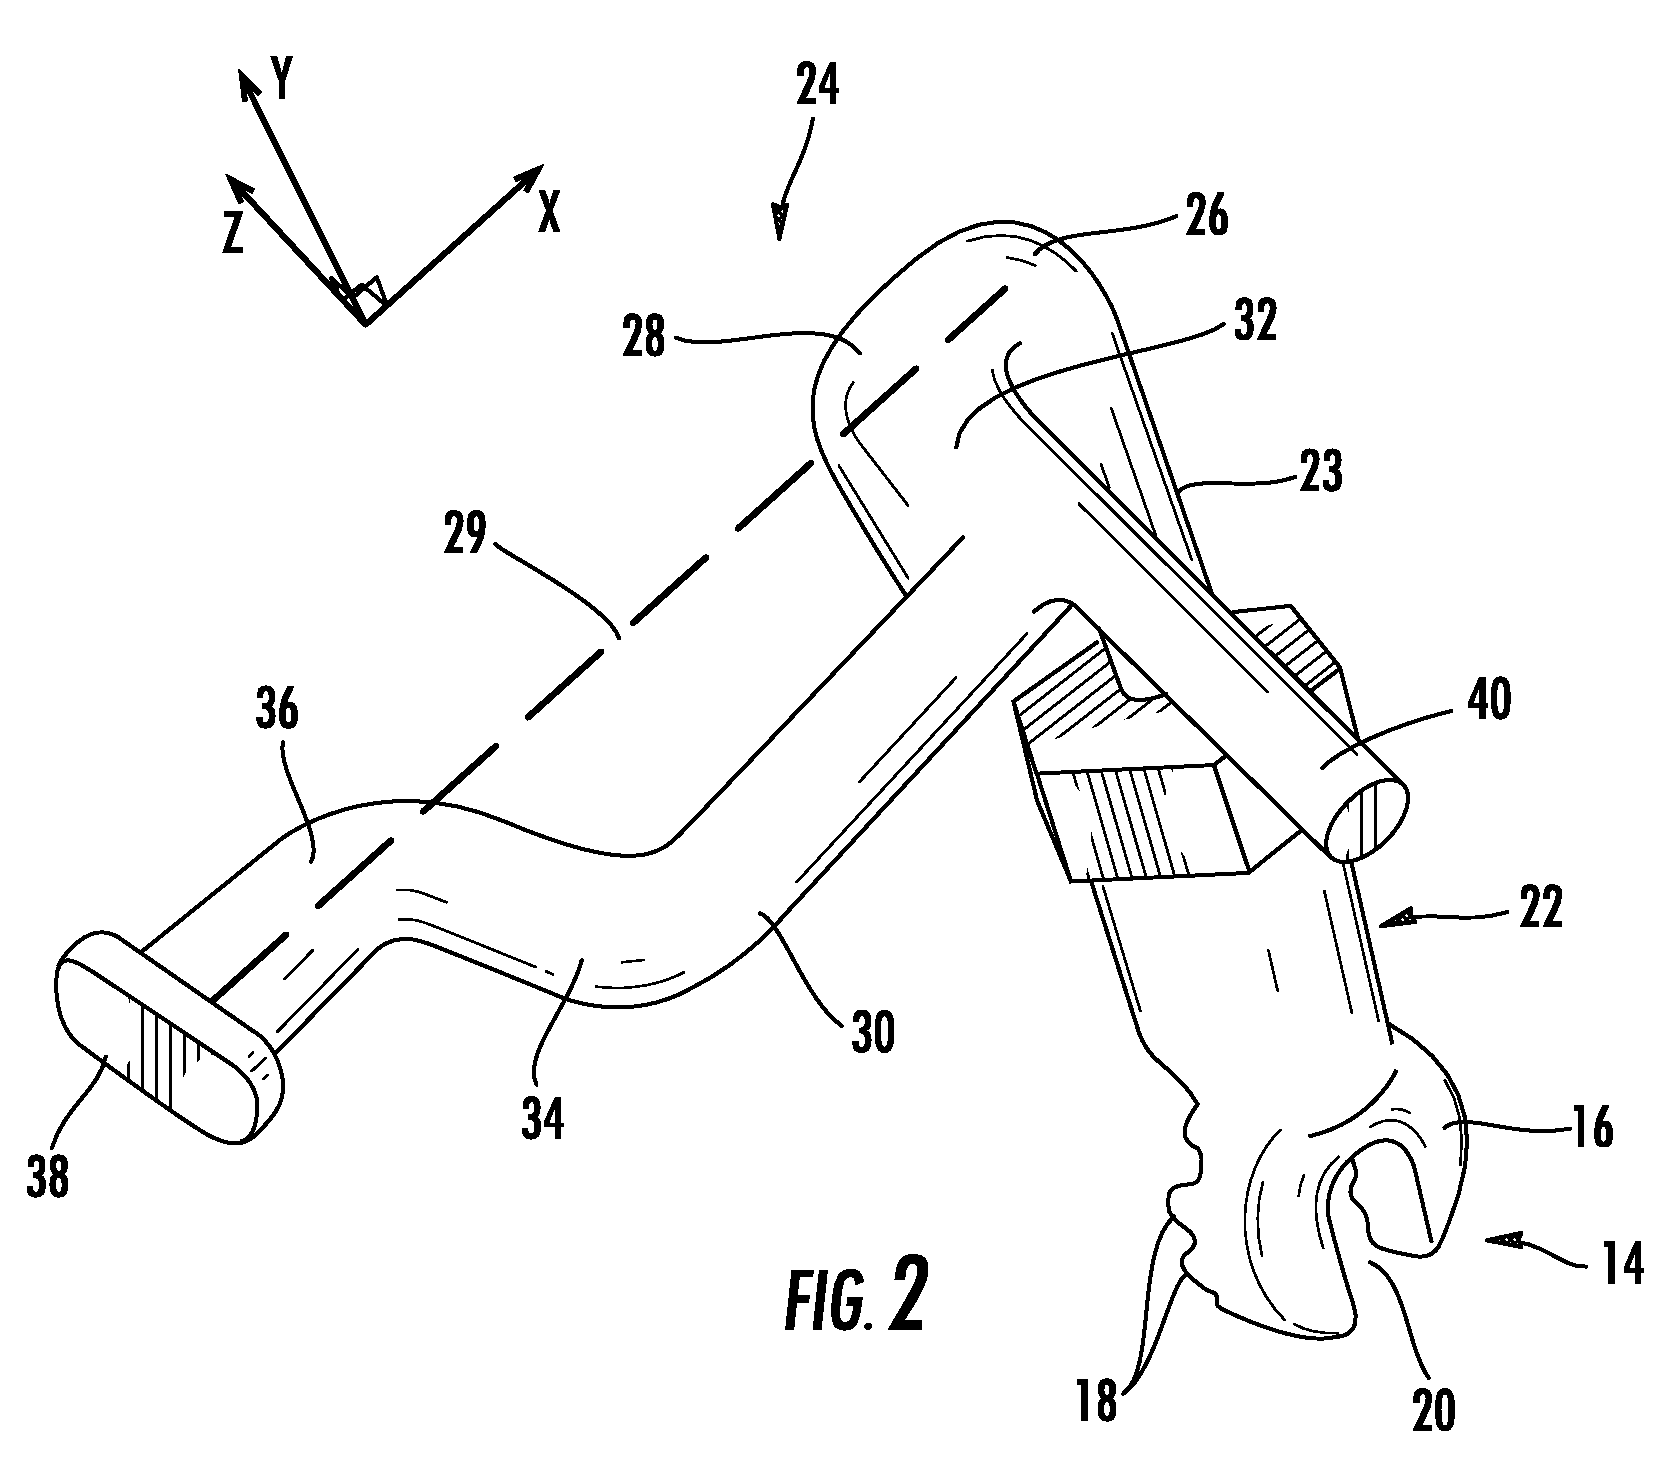 Pole-mounted hook device for electric utility applications